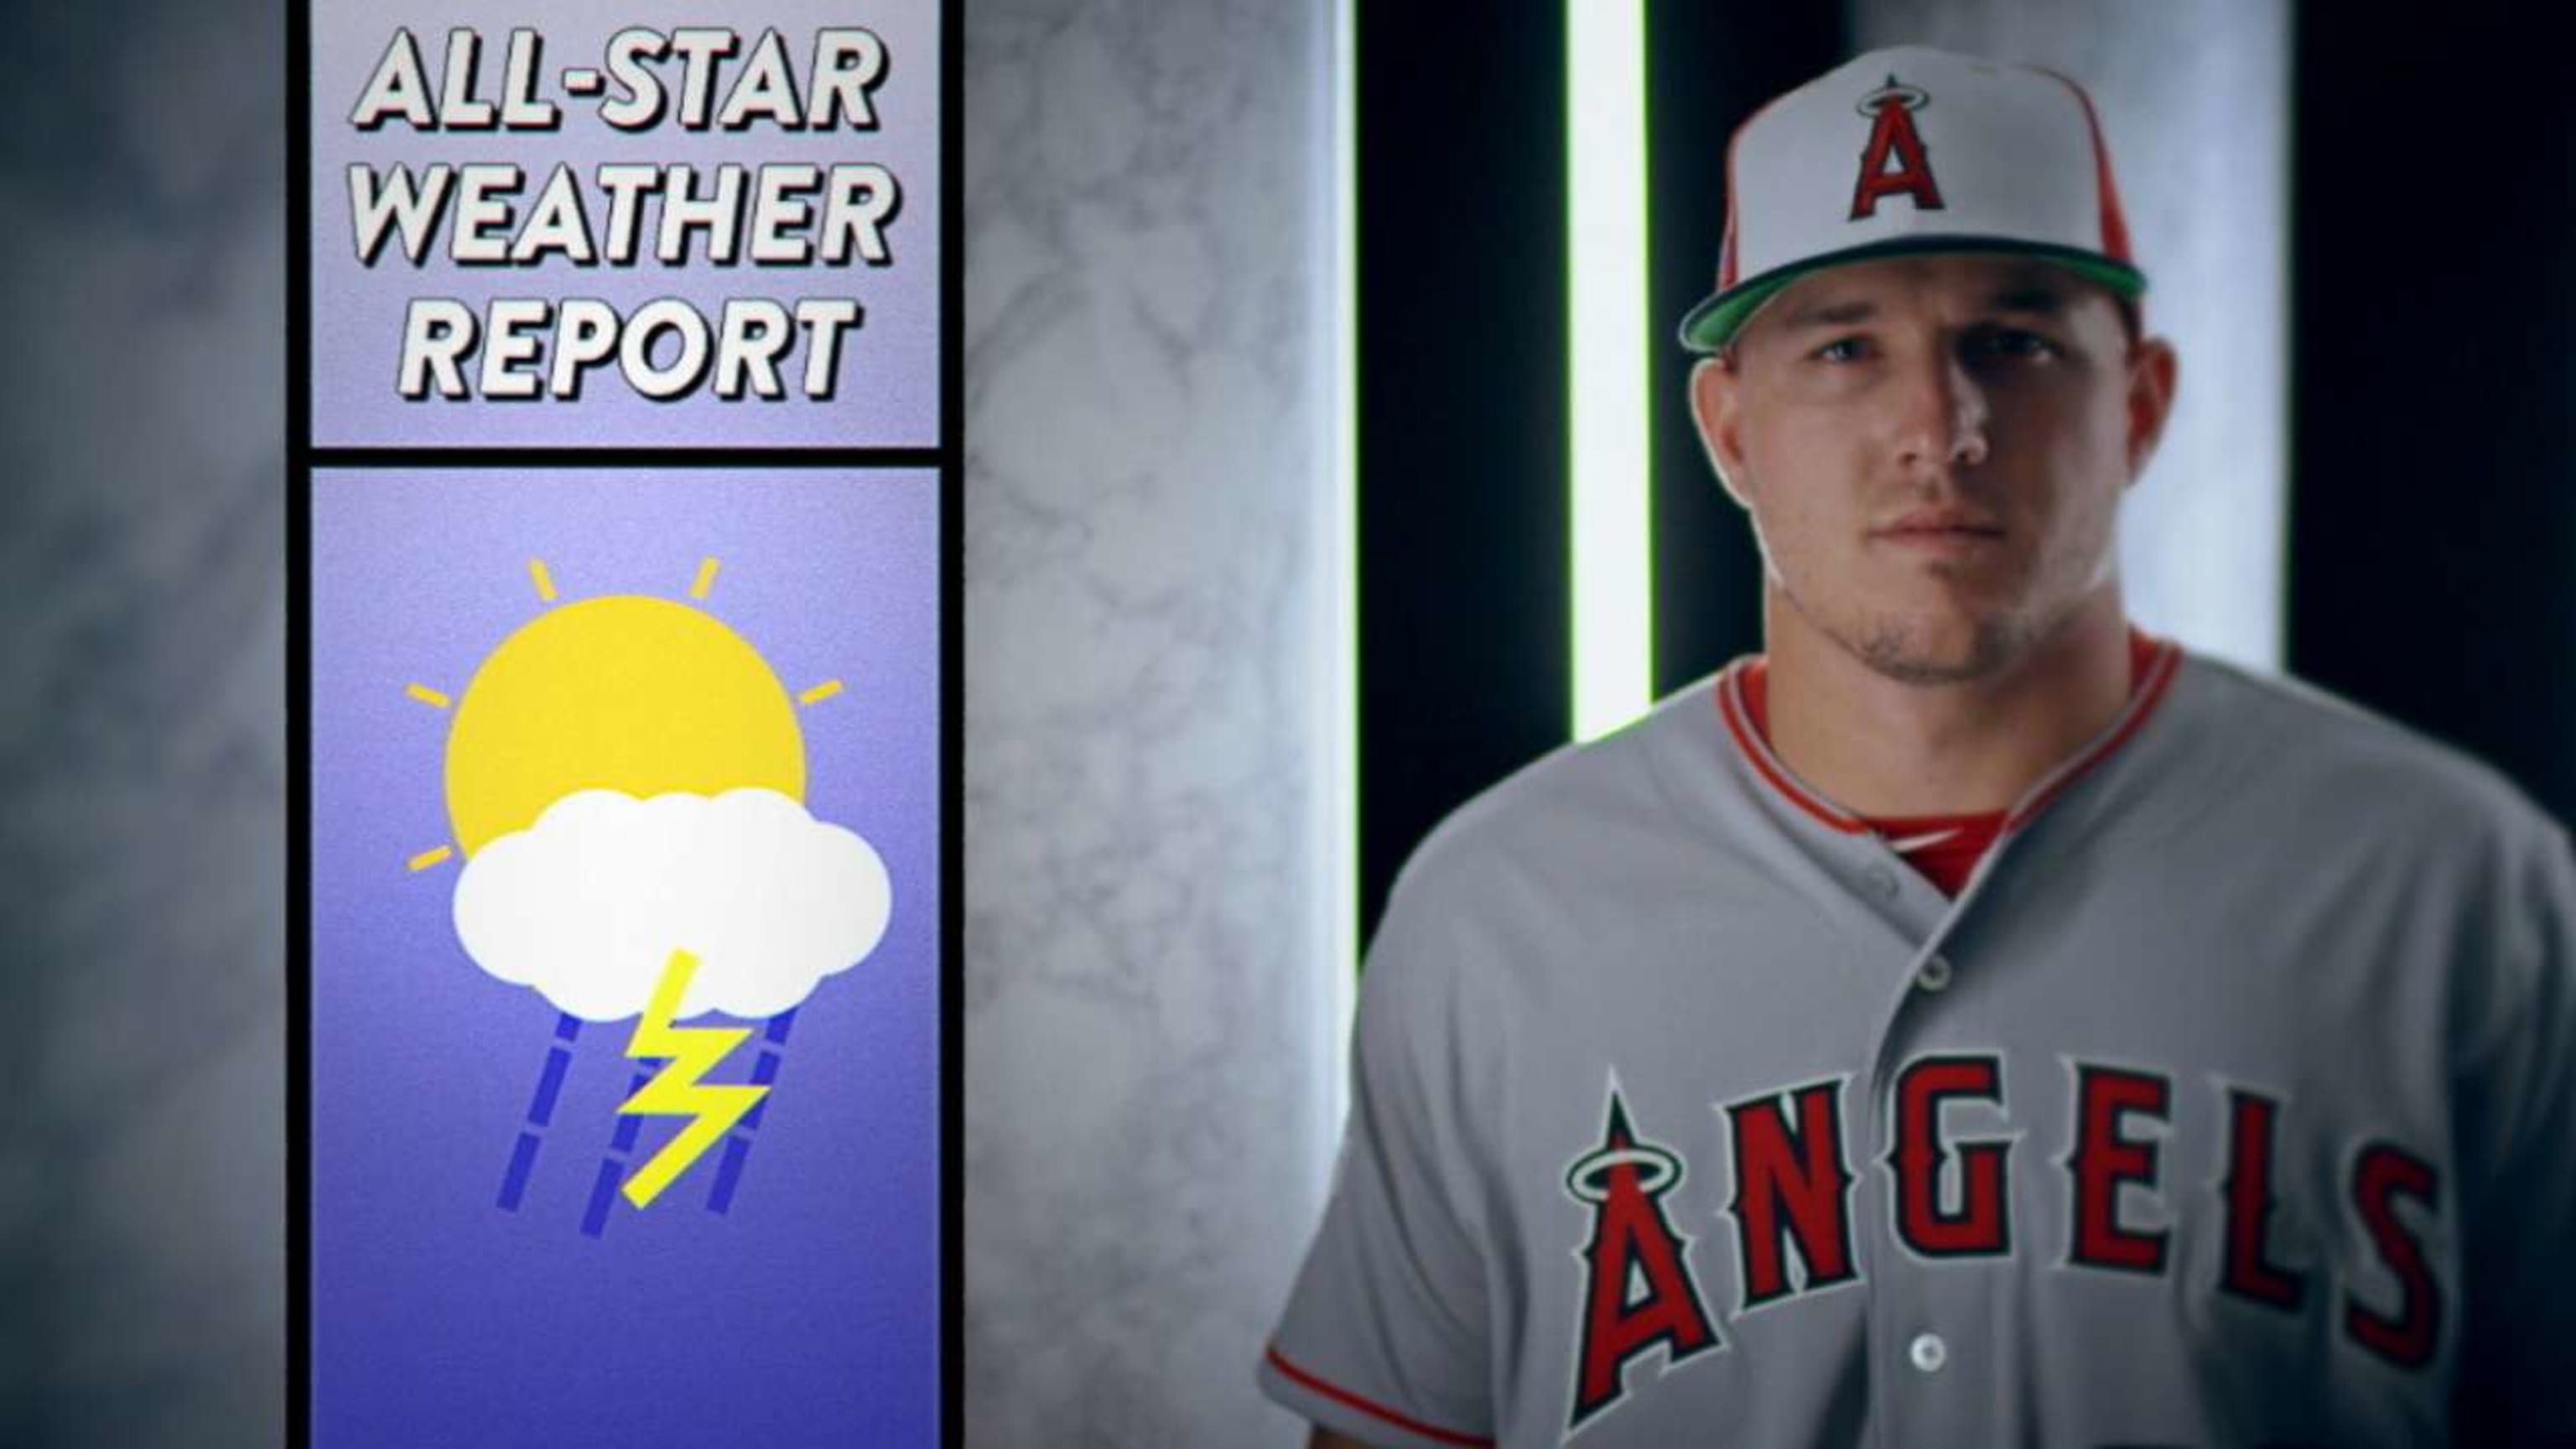 MLB All-Star Game: Mike Trout shines at Midsummer Classic again